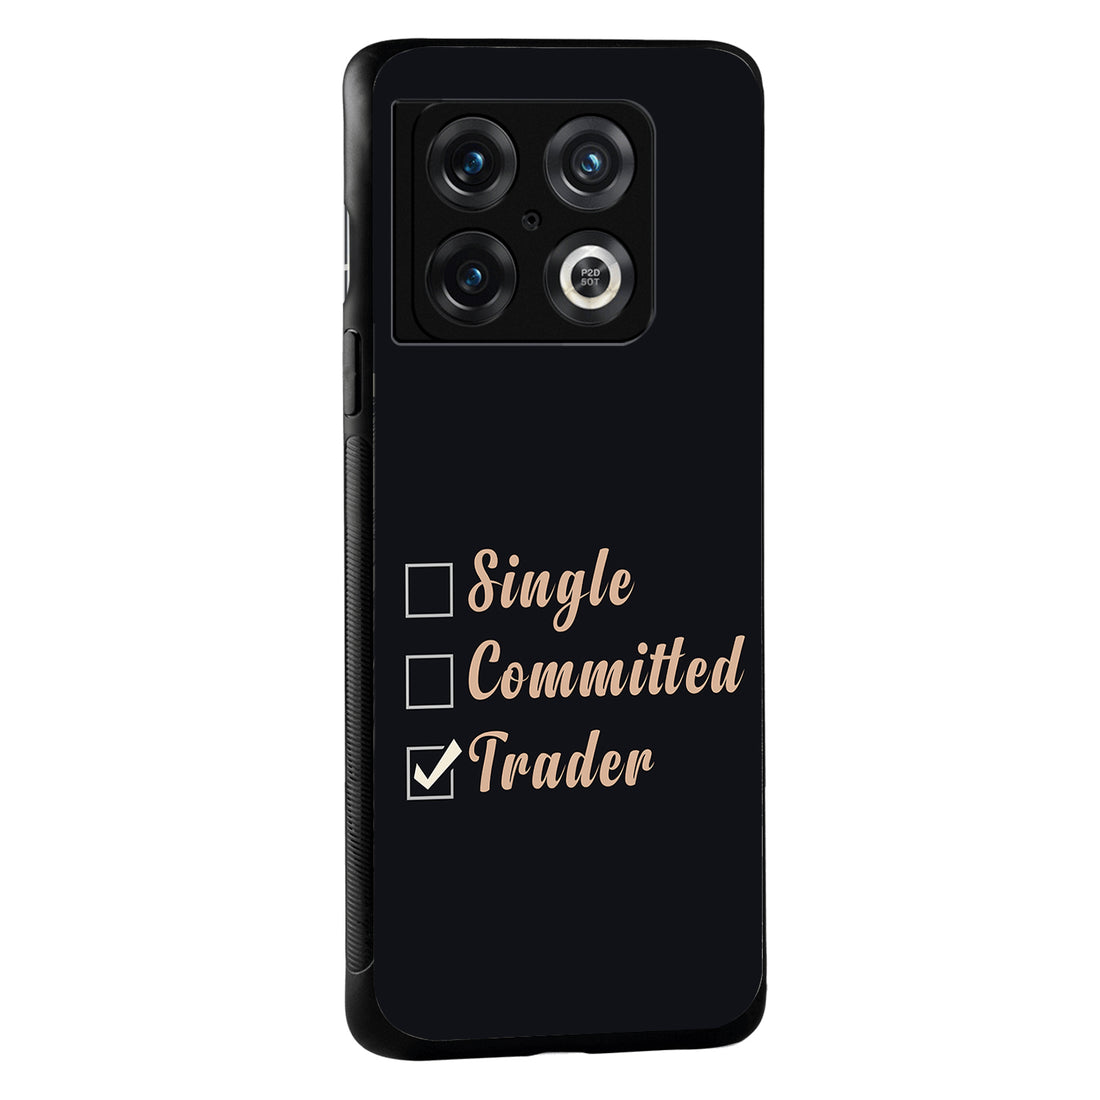 Single, Commited, Trader Trading Oneplus 10 Pro Back Case